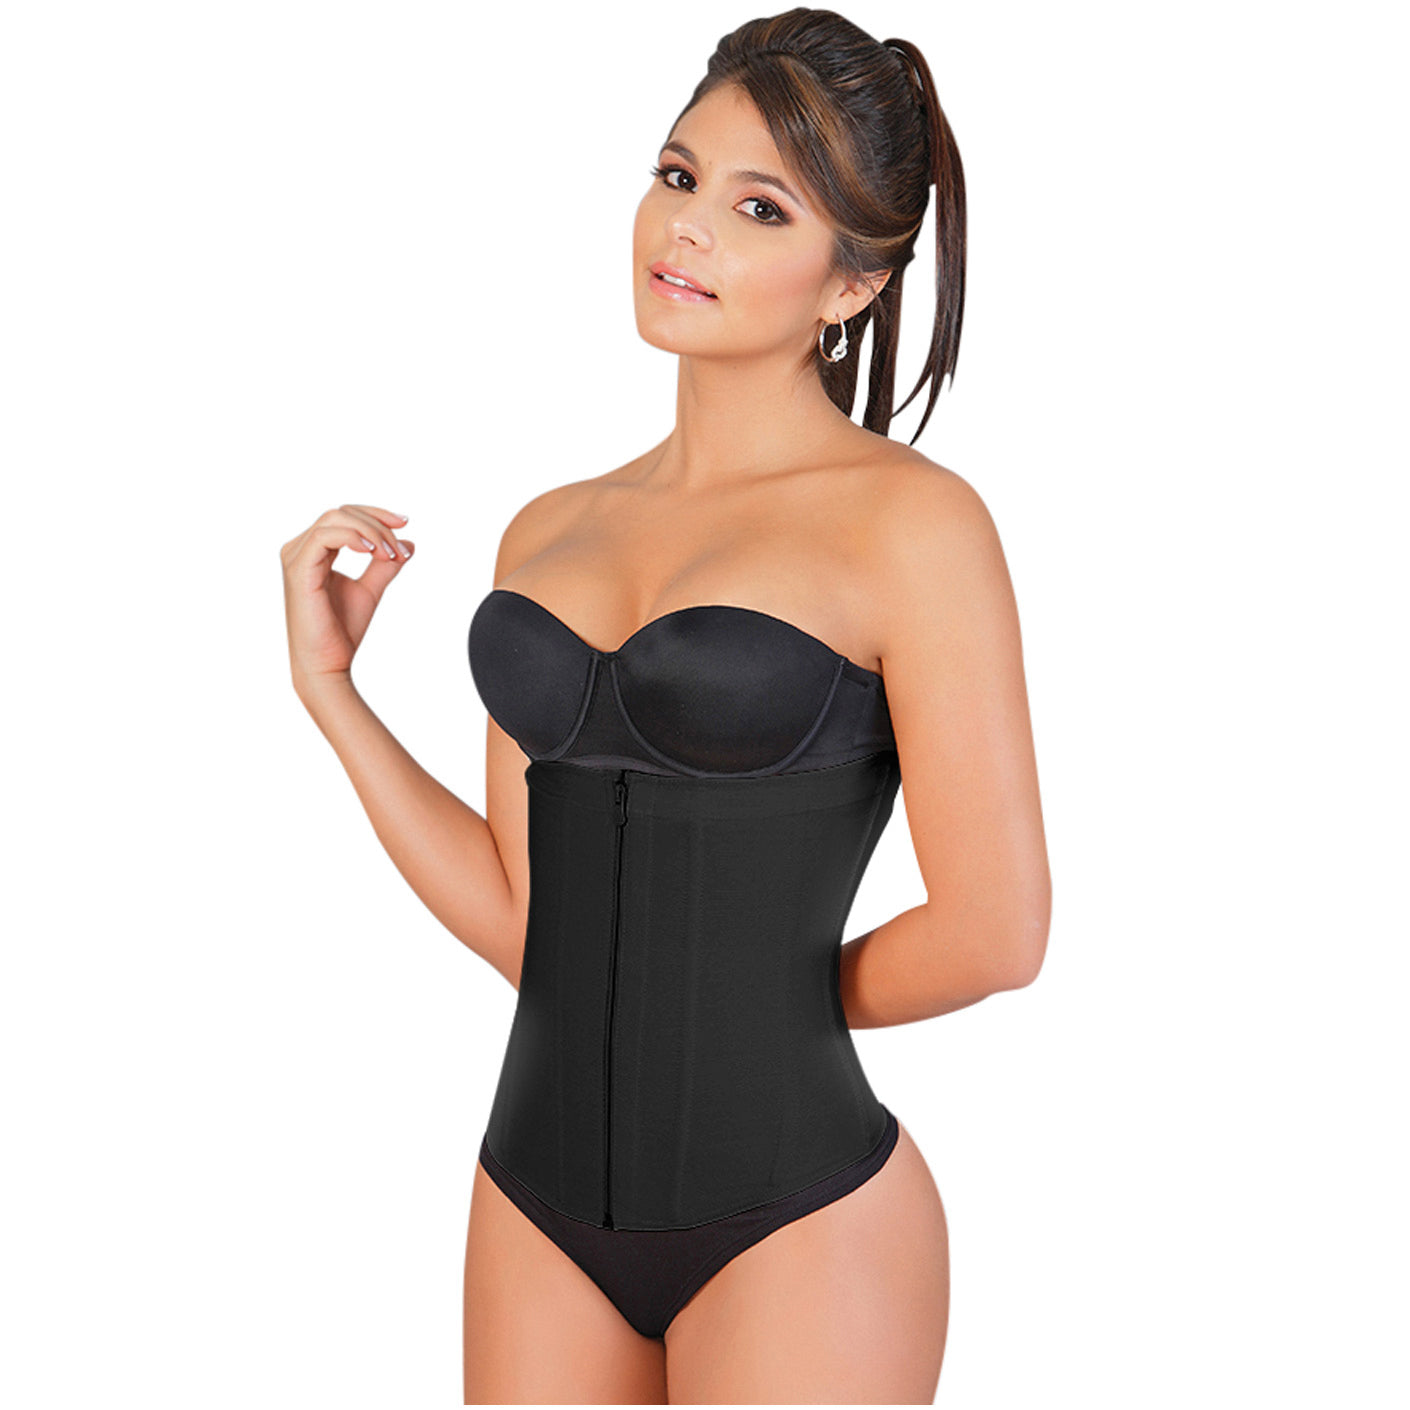 Salome Shapewear: 0315-1 - Strapless Waist Cincher Trainer for Women |  Colombian Body Shaper for Daily Use | Powernet